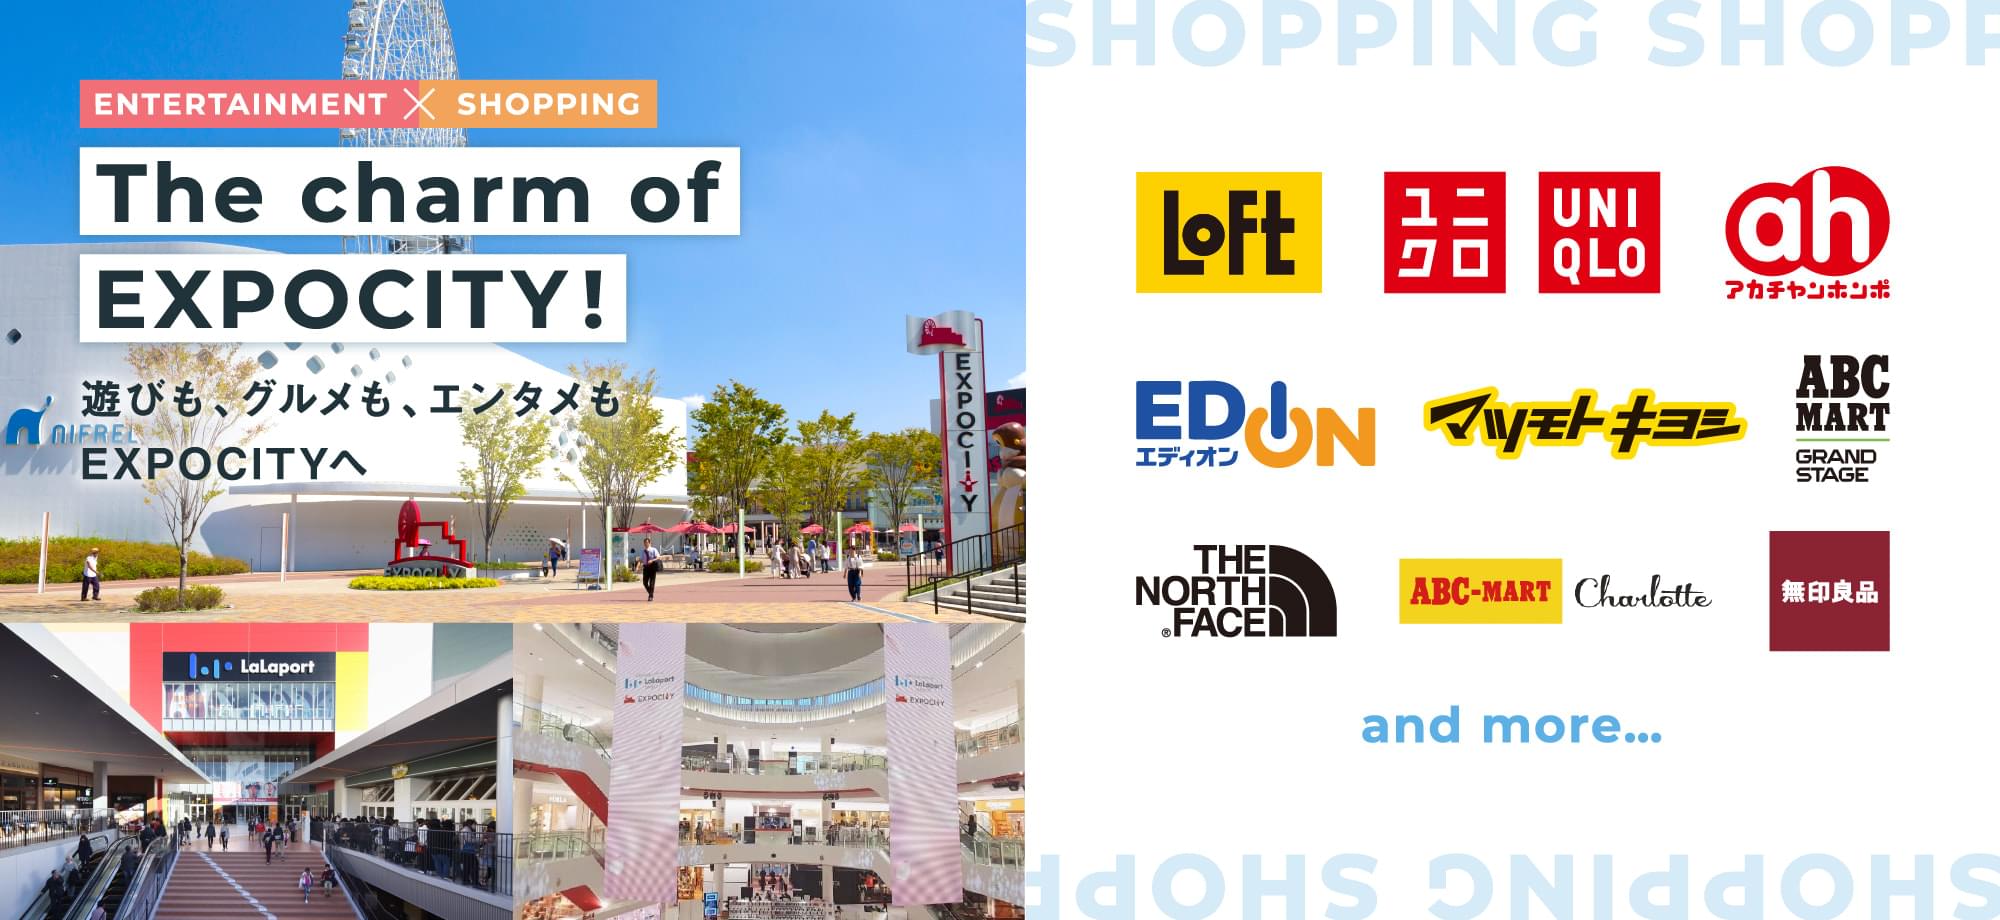 [ENTERTAINMENT × SHOPPING] The charm of EXPOCITY! 遊びも、グルメも、エンタメもEXPOCITYへ